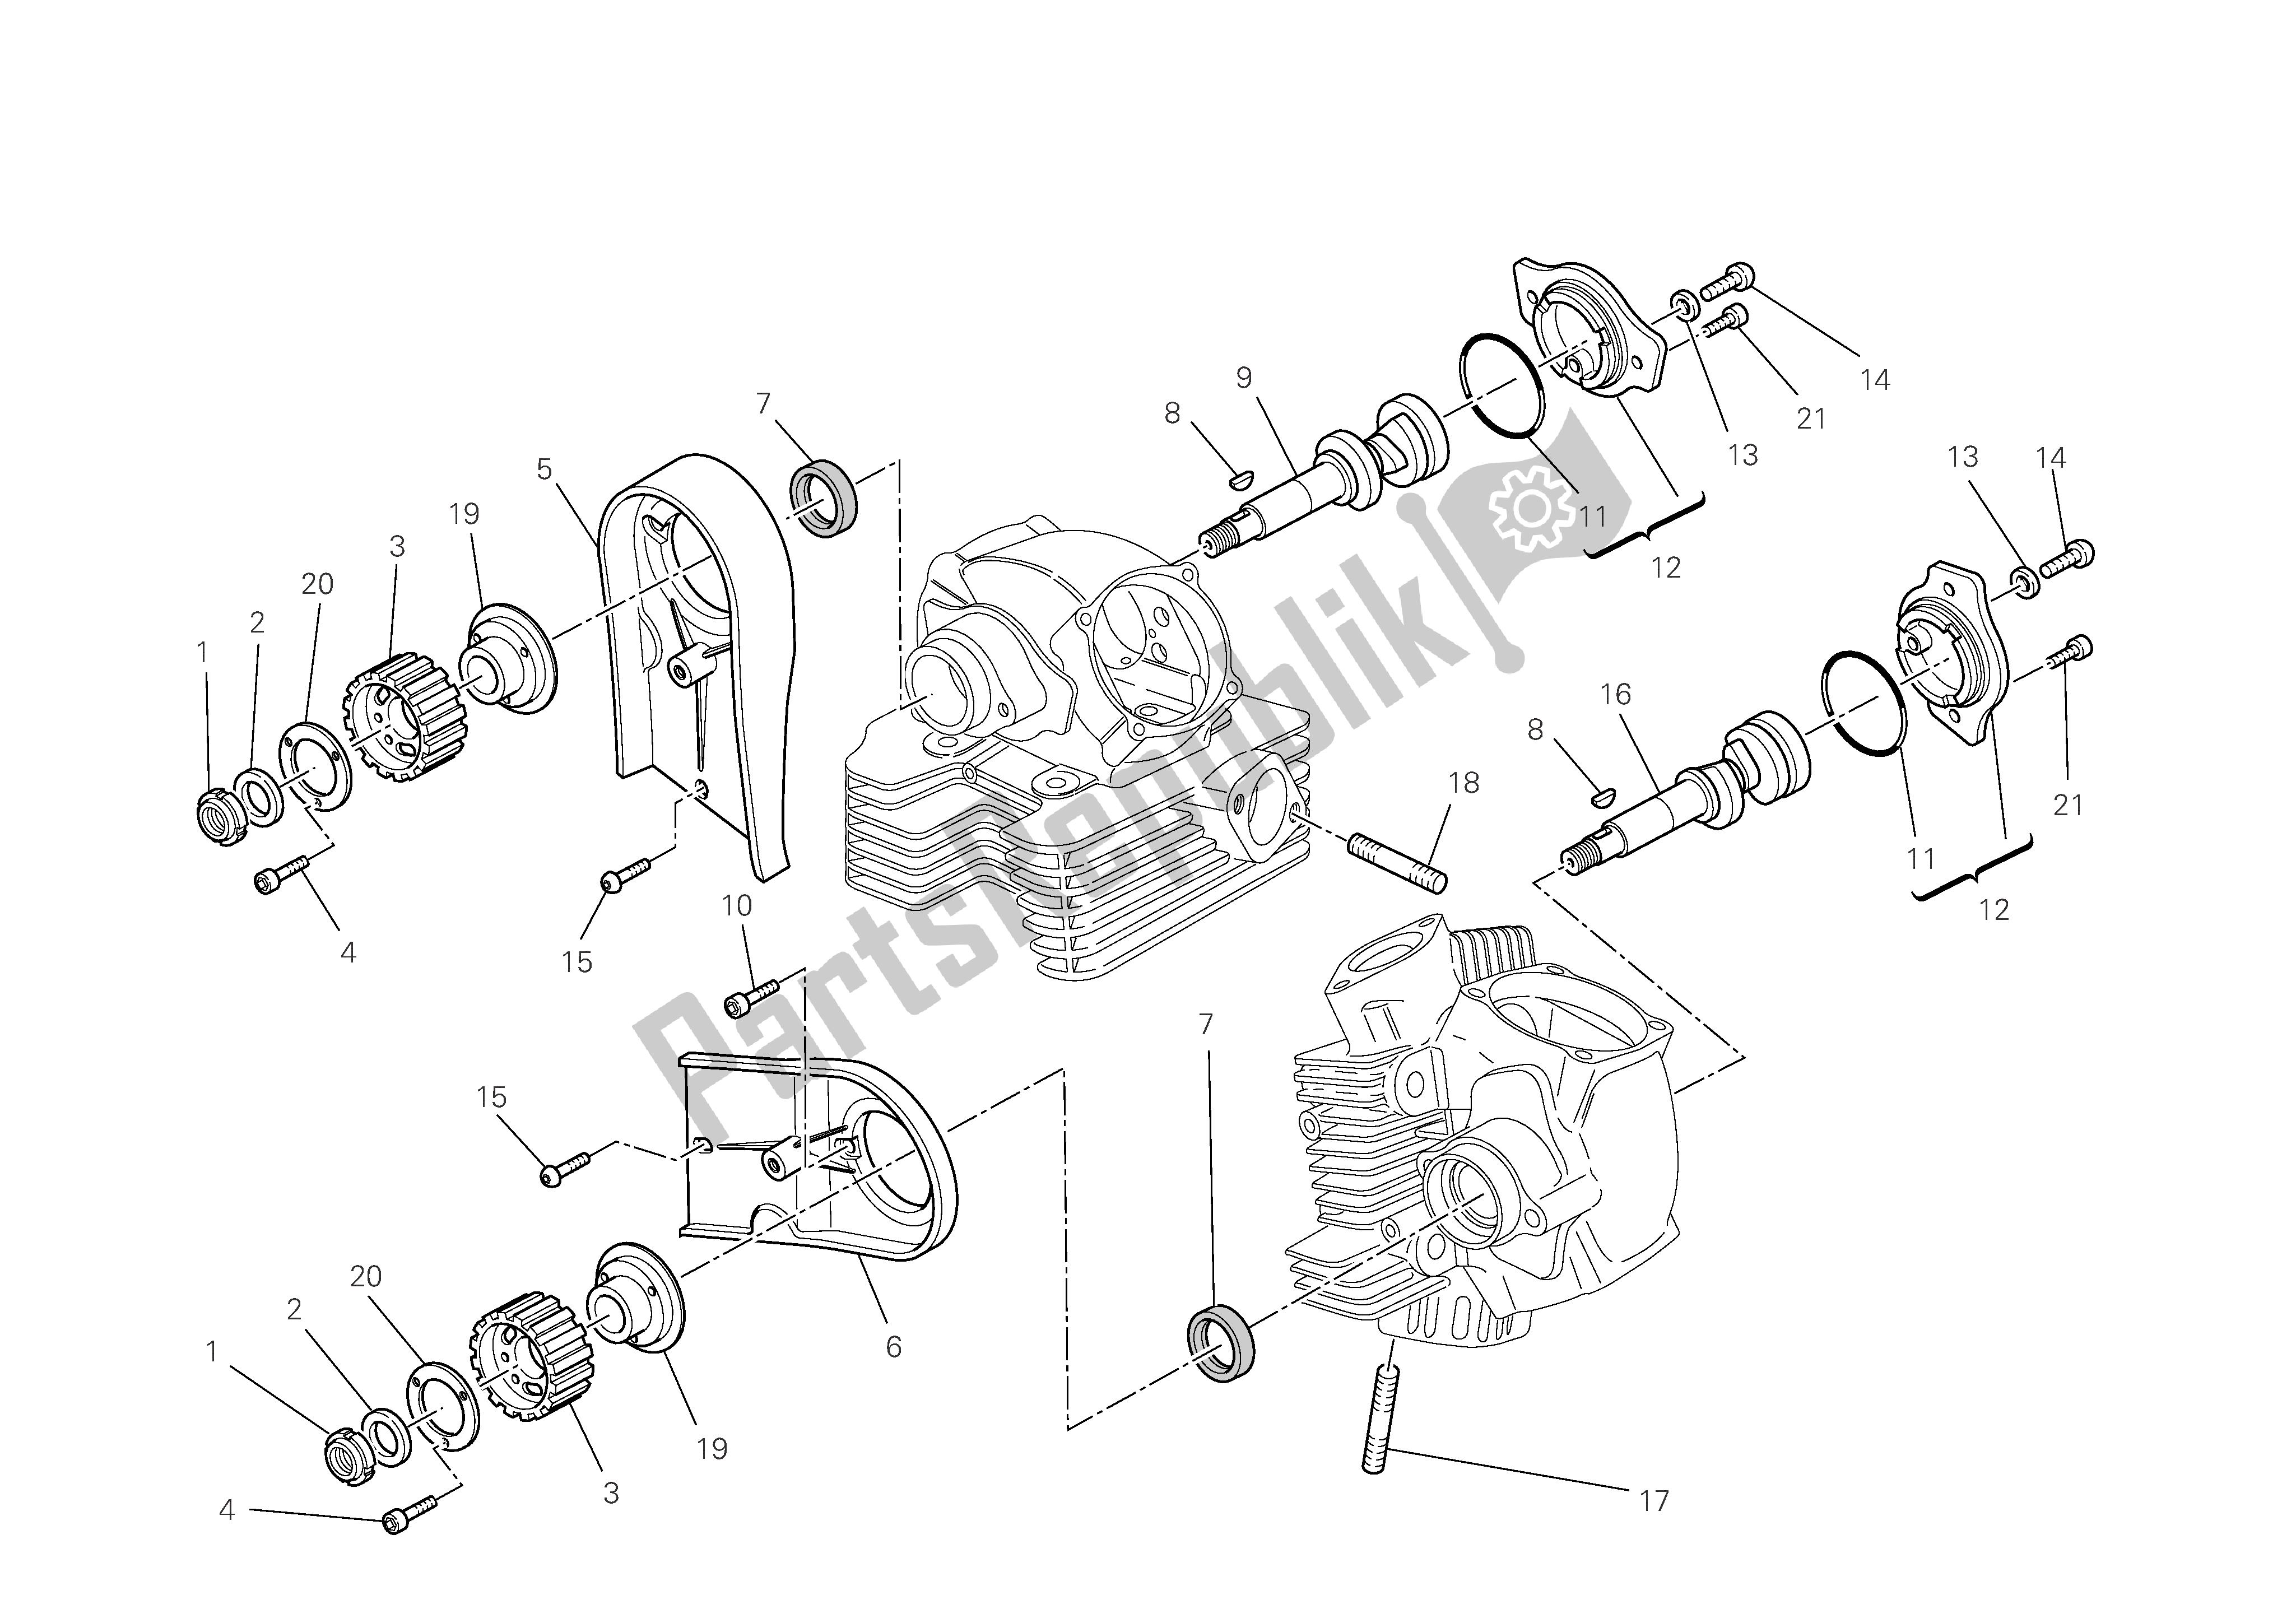 All parts for the Cylinder Head : Timingsystem of the Ducati Monster 696 2009